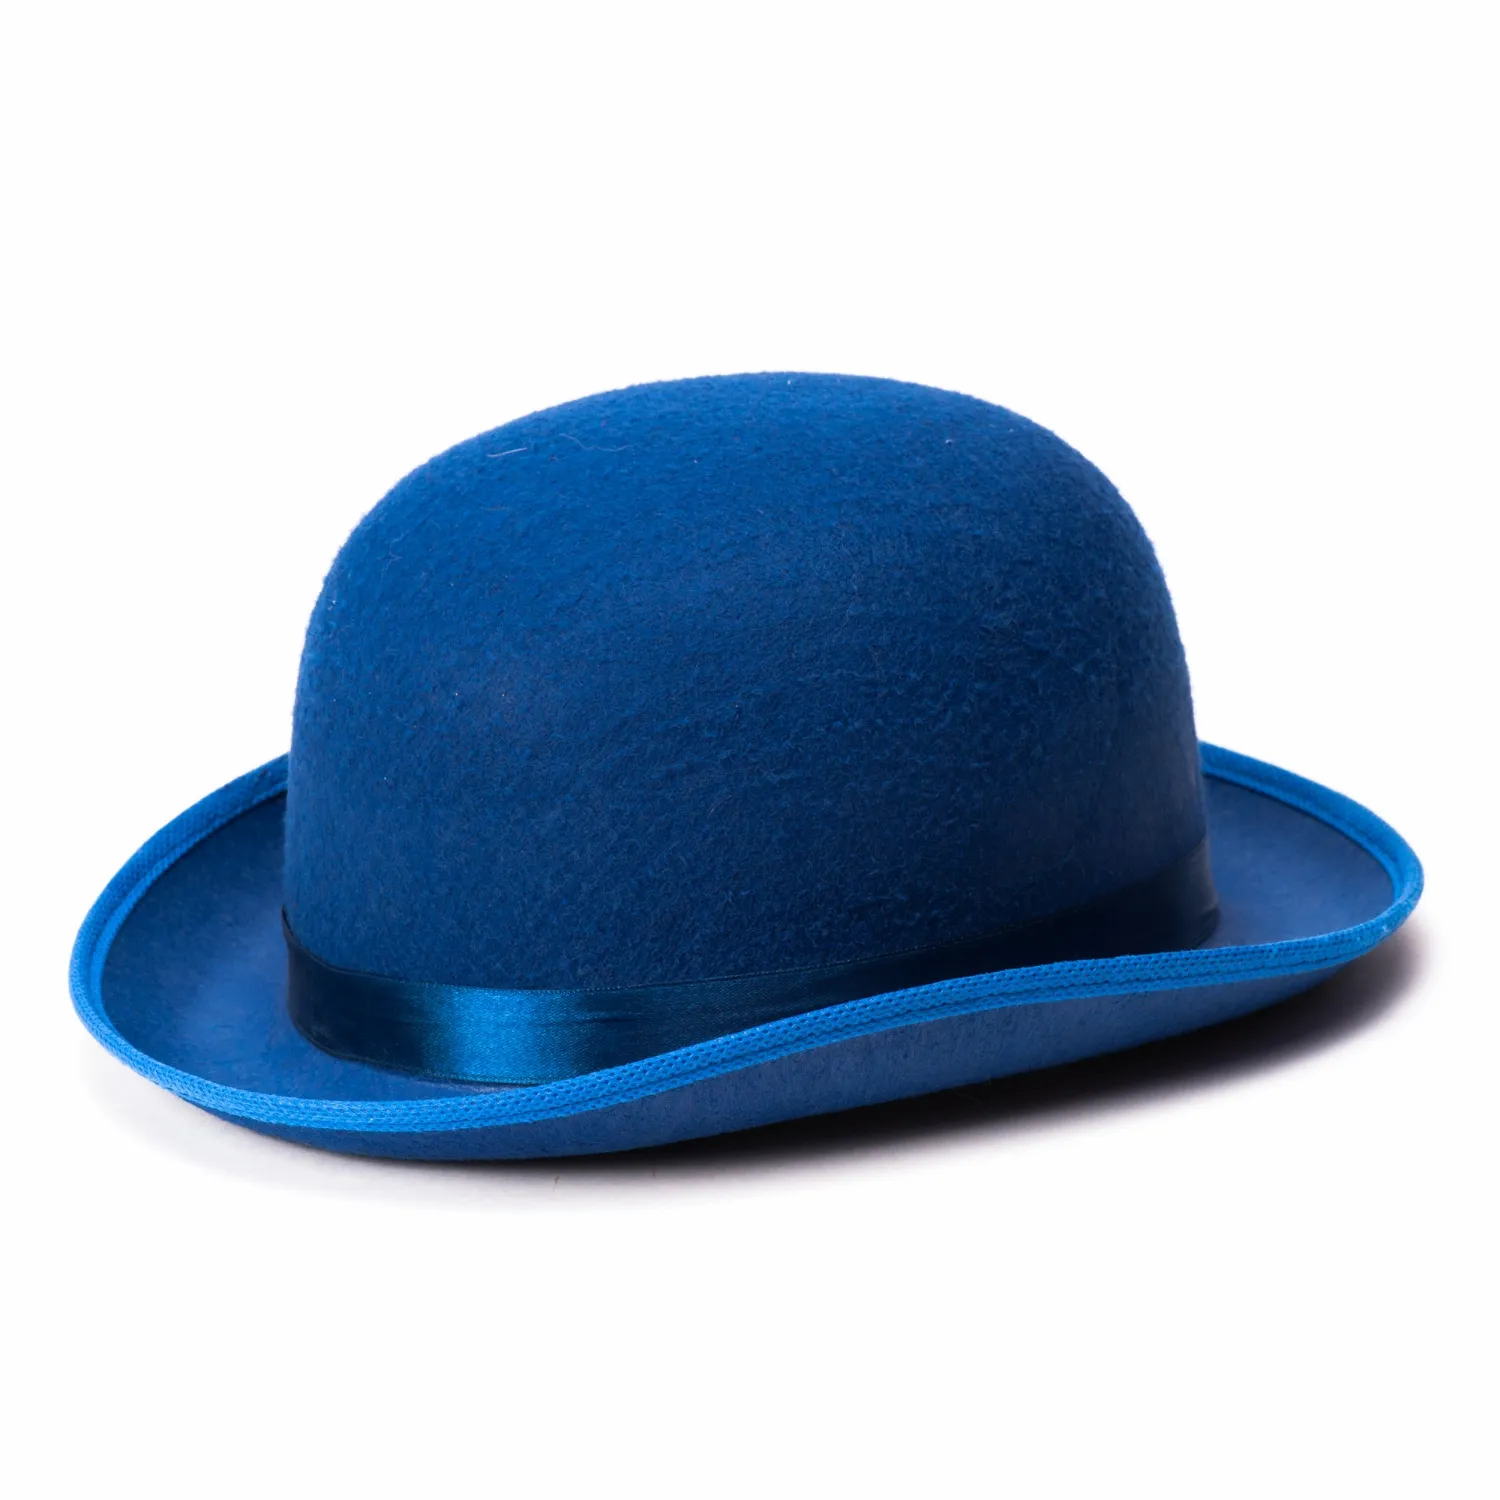 A blue bowler hat on a white